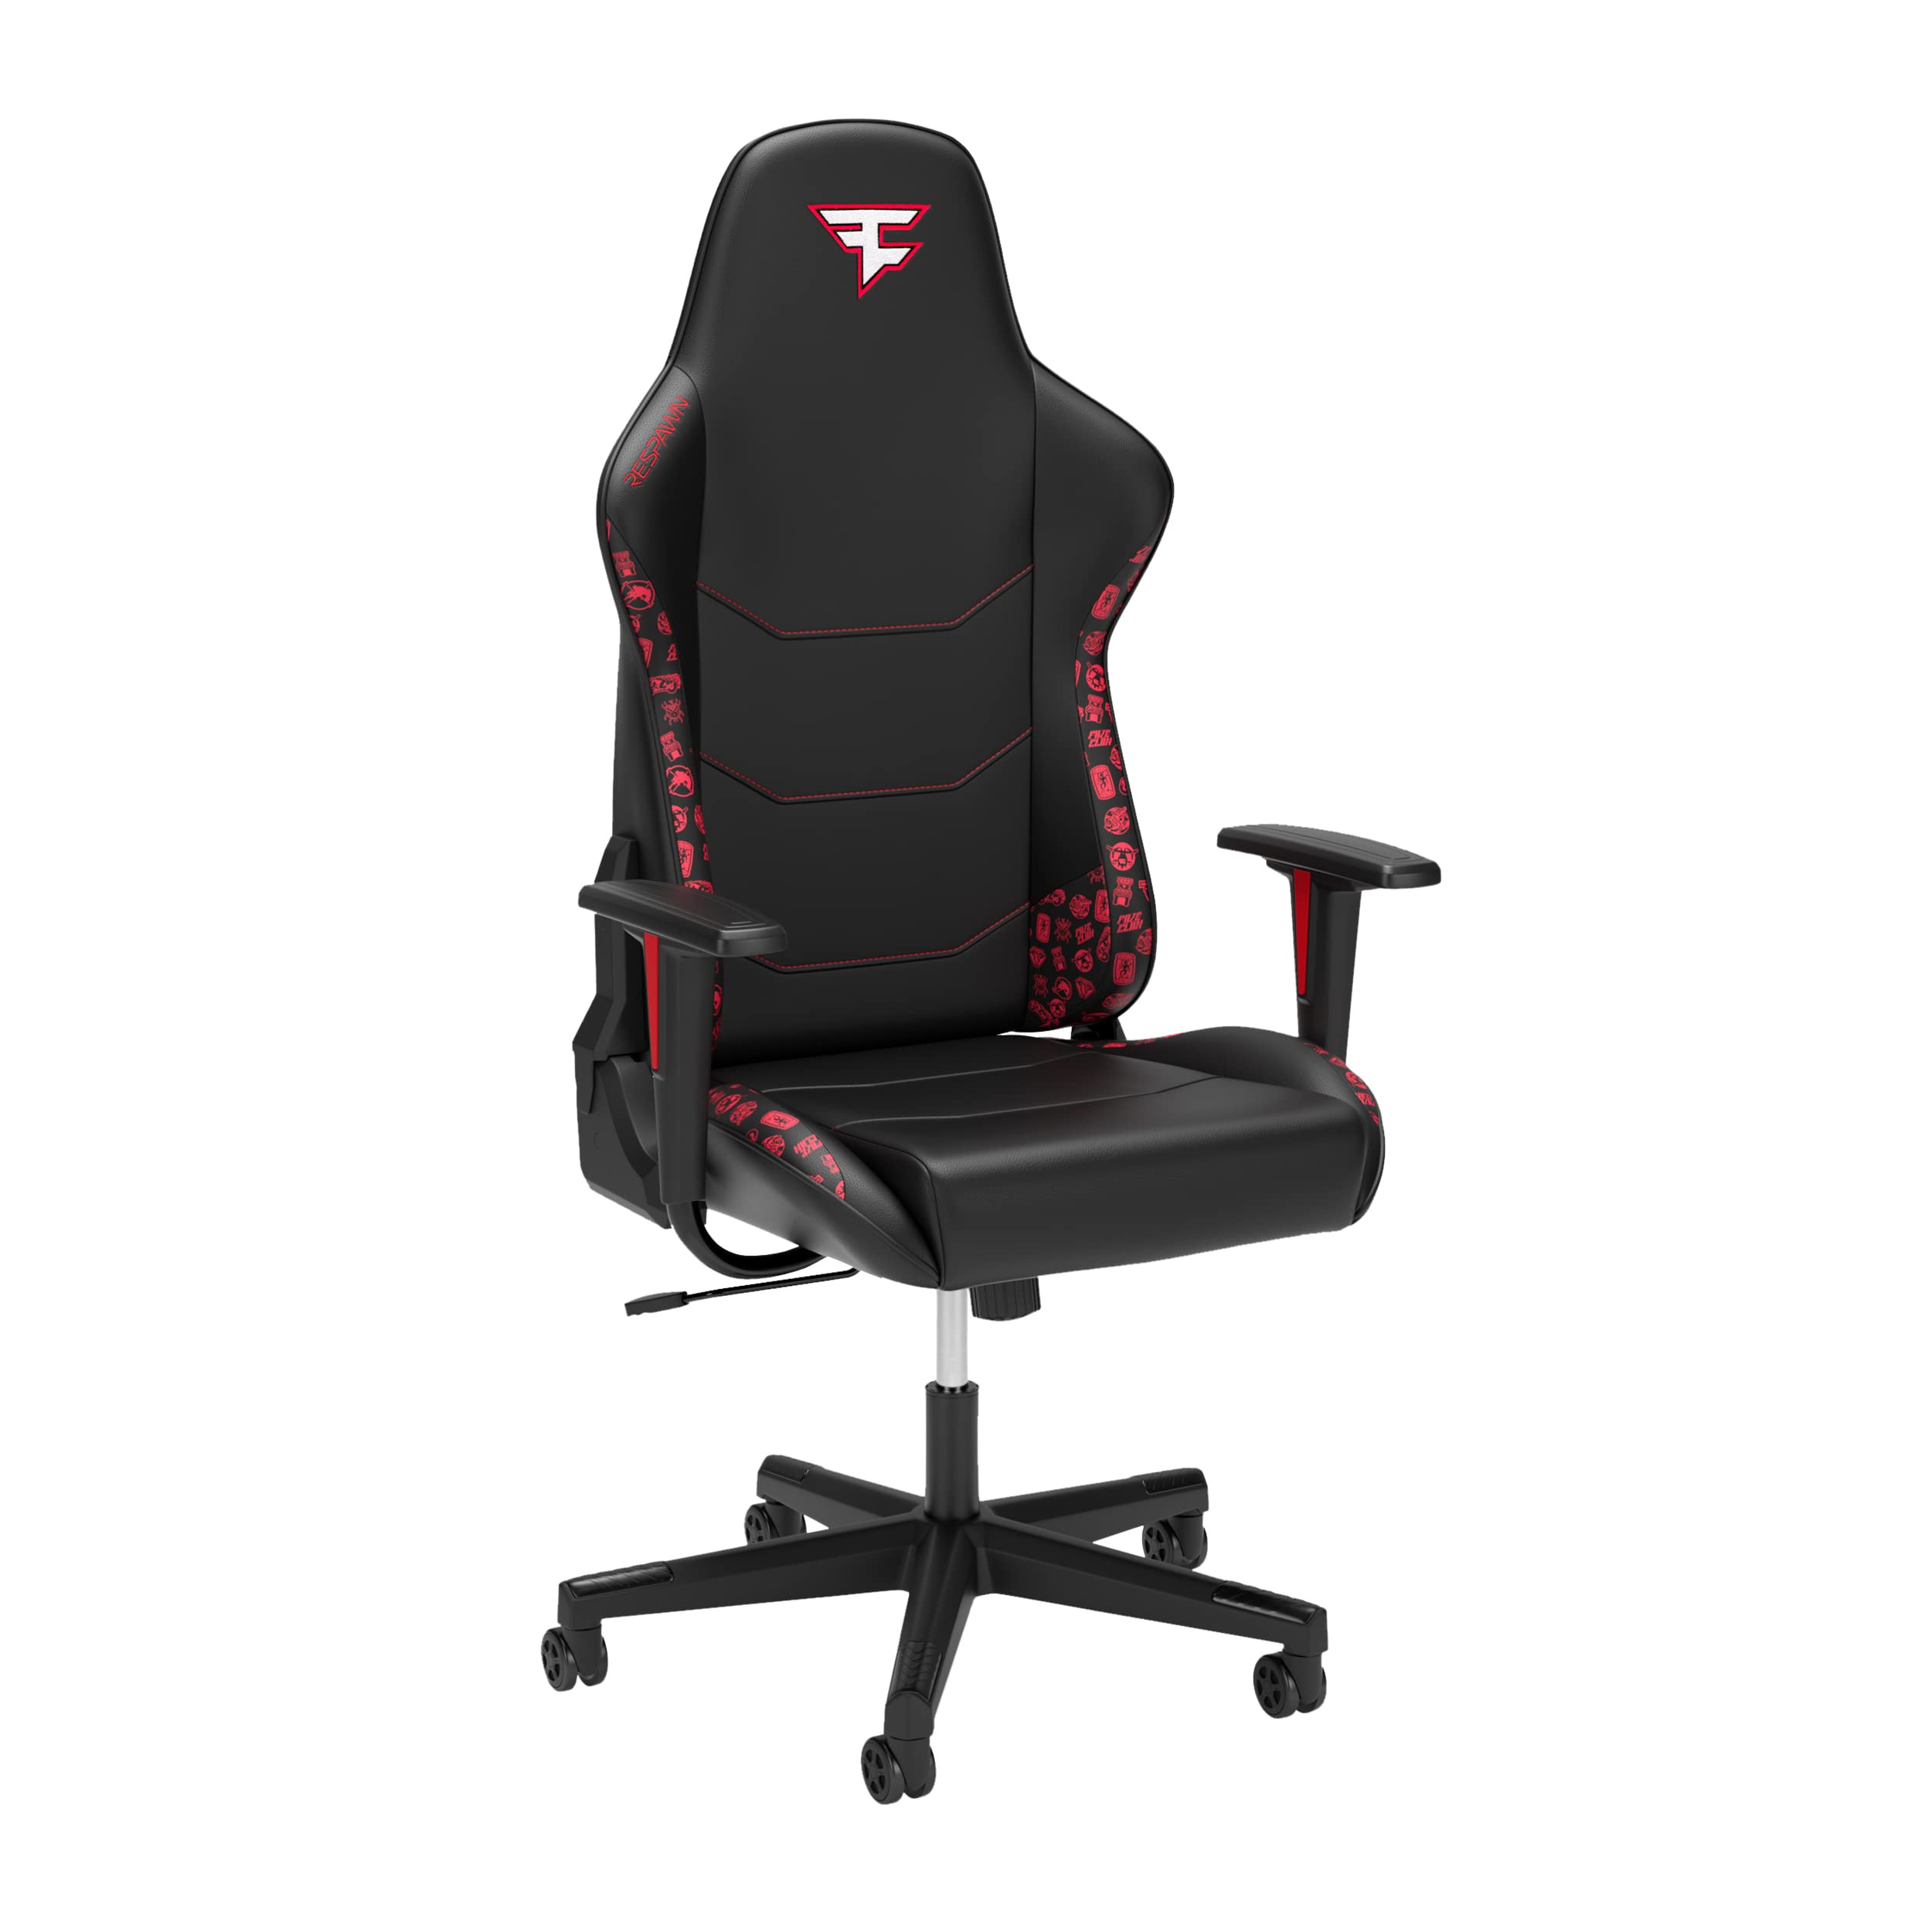 Respawn 110 Ergonomic Racing Style High Back Gaming Chair w/ Head Rest, 135 Degree Recline, & Adjustable Tilt Tension (2023, Faze Clan) $100 + Free Shipping